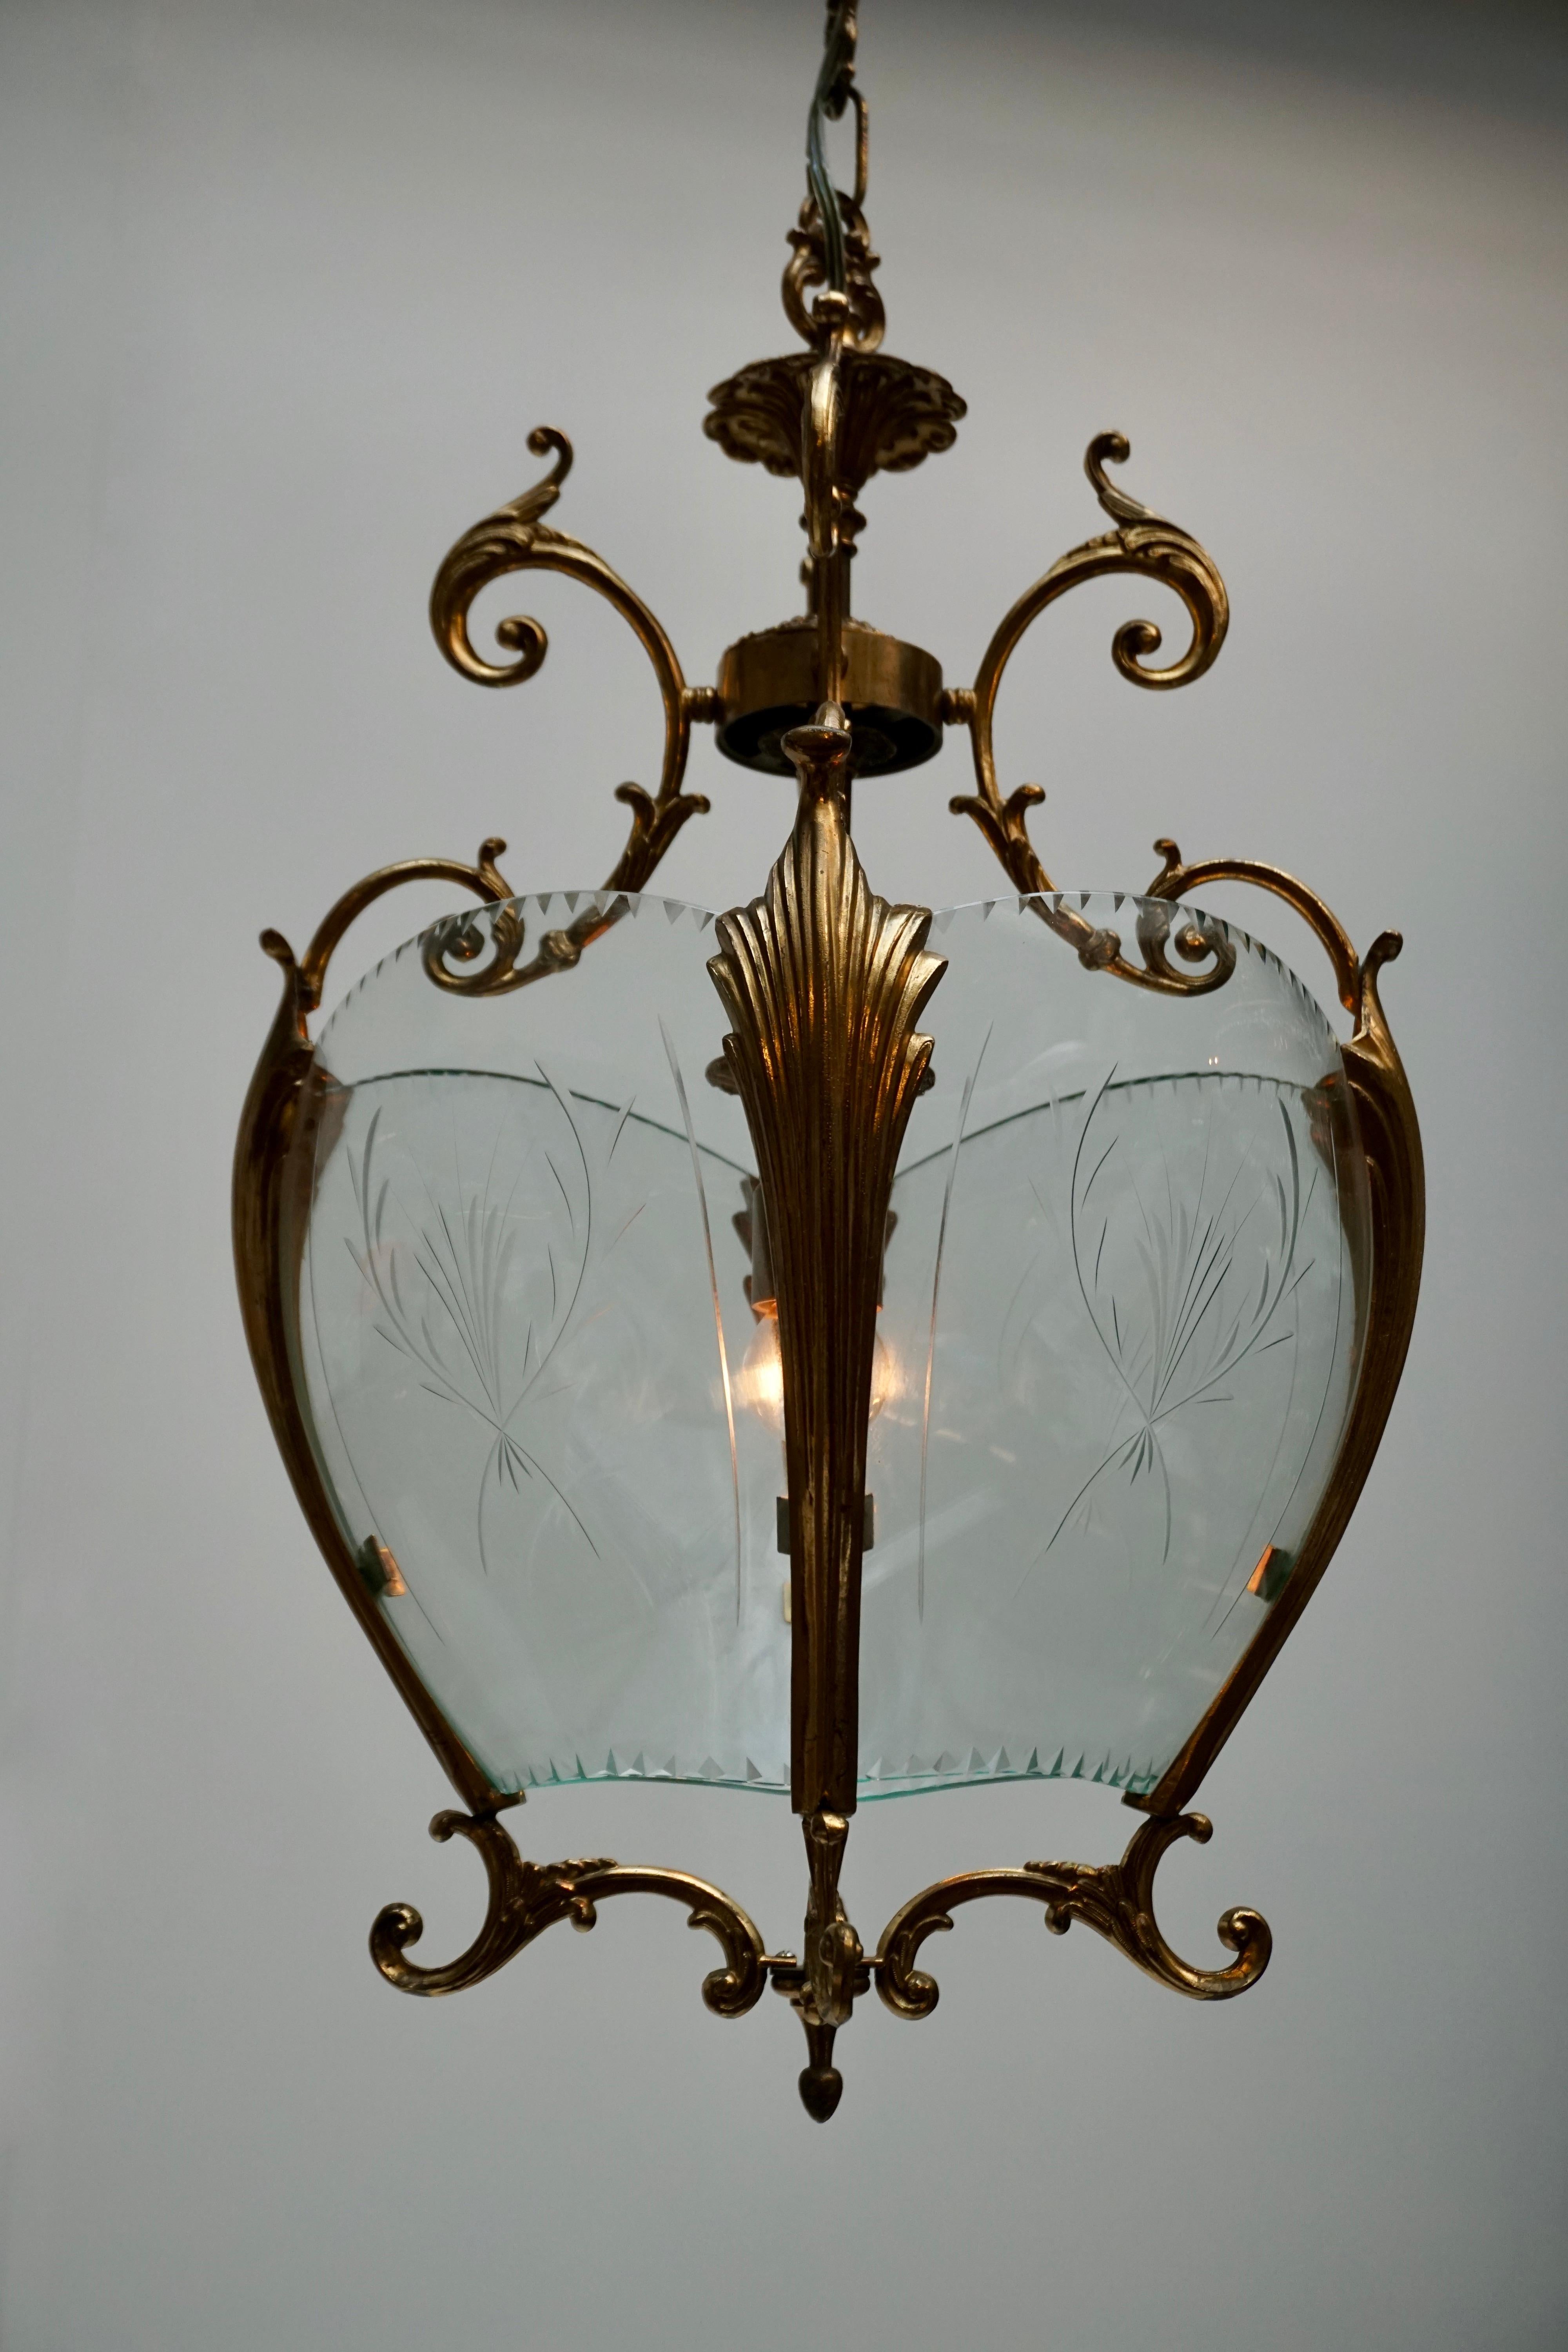 20th Century Gold Bronze Hall Lantern with Finely Cut Glass, circa 1950s For Sale